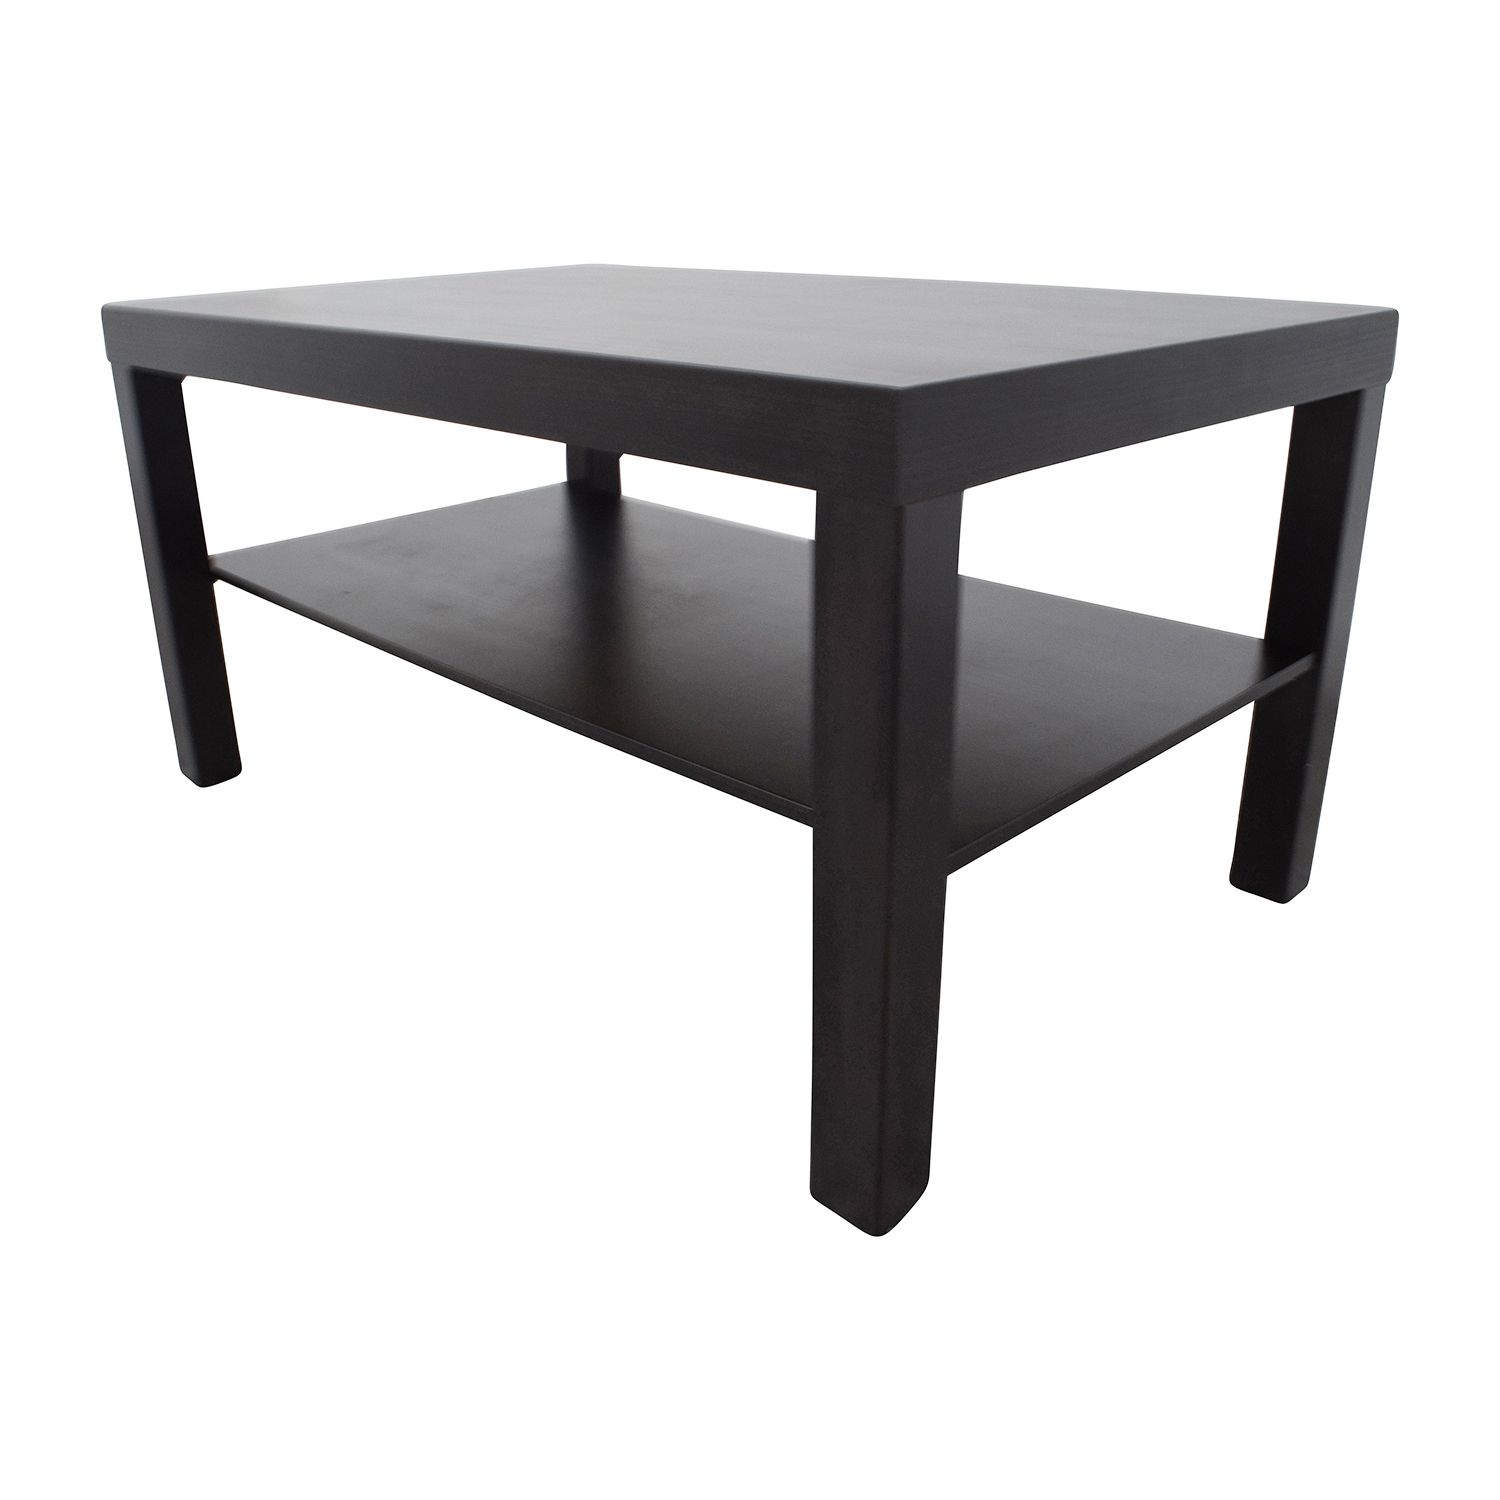 [%71% Off – Ikea Ikea Dark Brown Rectangular Coffee Table In Most Up To Date Dark Brown Coffee Tables|dark Brown Coffee Tables Within 2018 71% Off – Ikea Ikea Dark Brown Rectangular Coffee Table|newest Dark Brown Coffee Tables For 71% Off – Ikea Ikea Dark Brown Rectangular Coffee Table|popular 71% Off – Ikea Ikea Dark Brown Rectangular Coffee Table Regarding Dark Brown Coffee Tables%] (View 10 of 20)